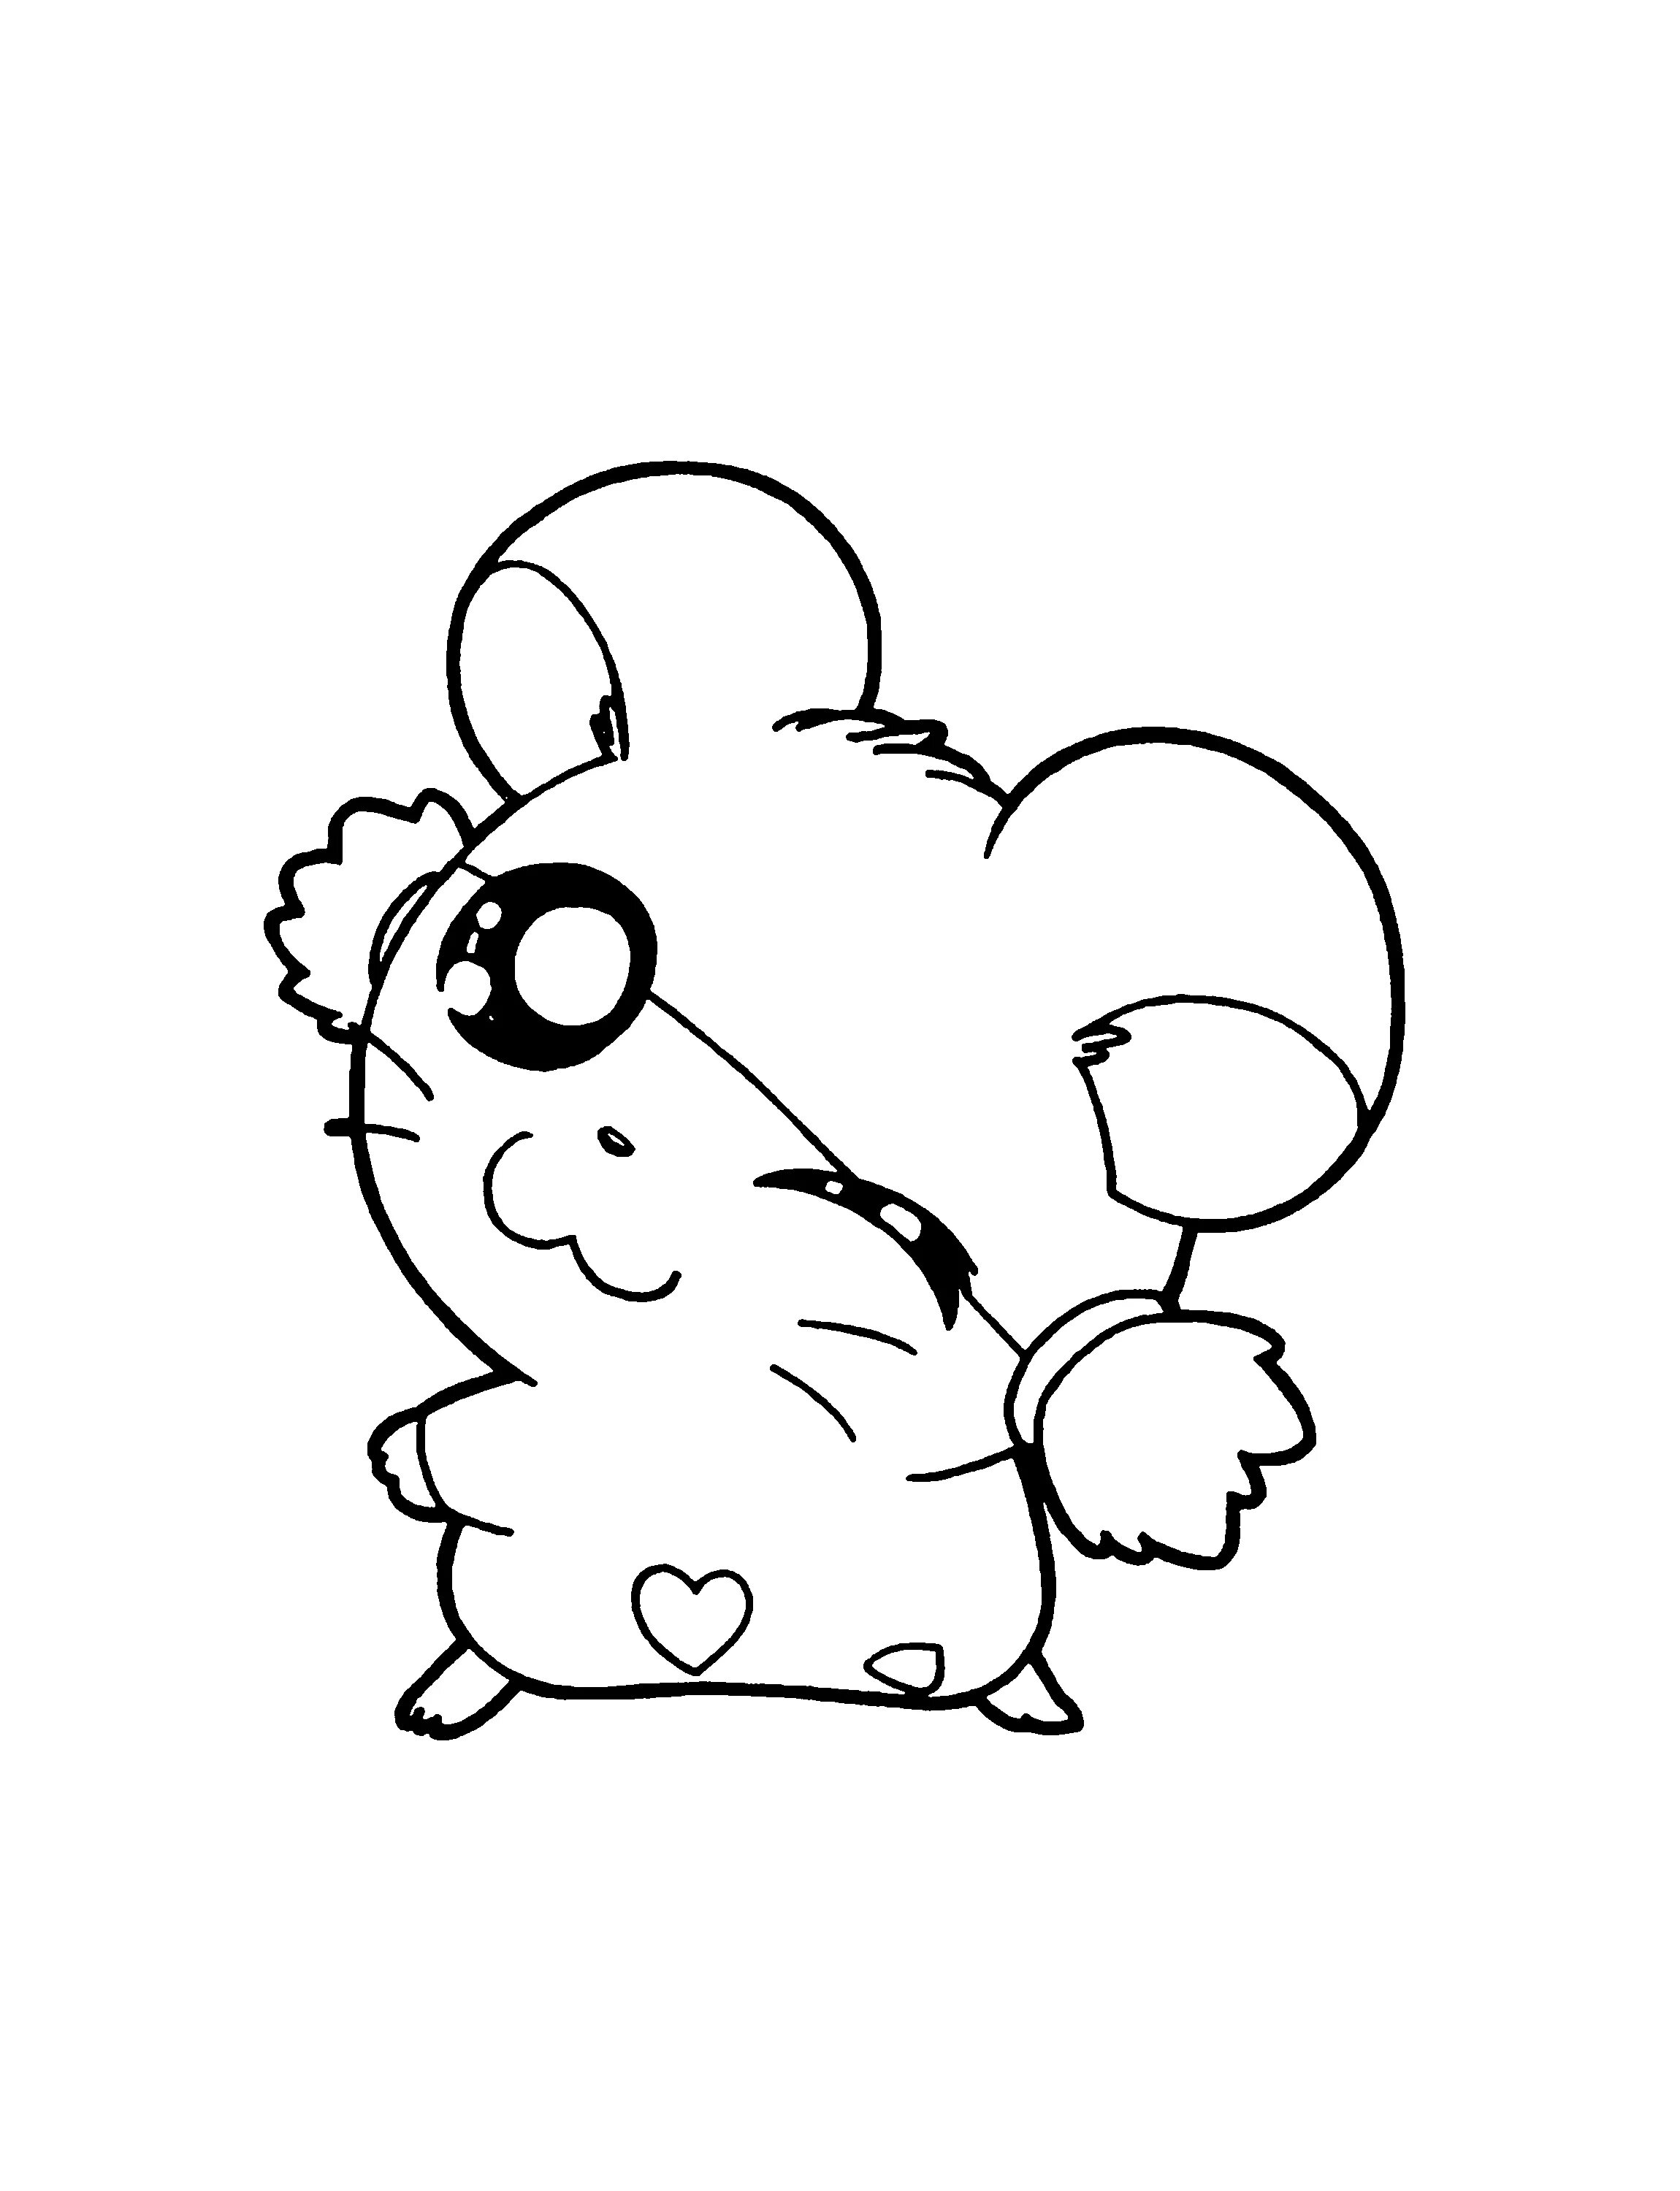 Animated hamster coloring book for girls